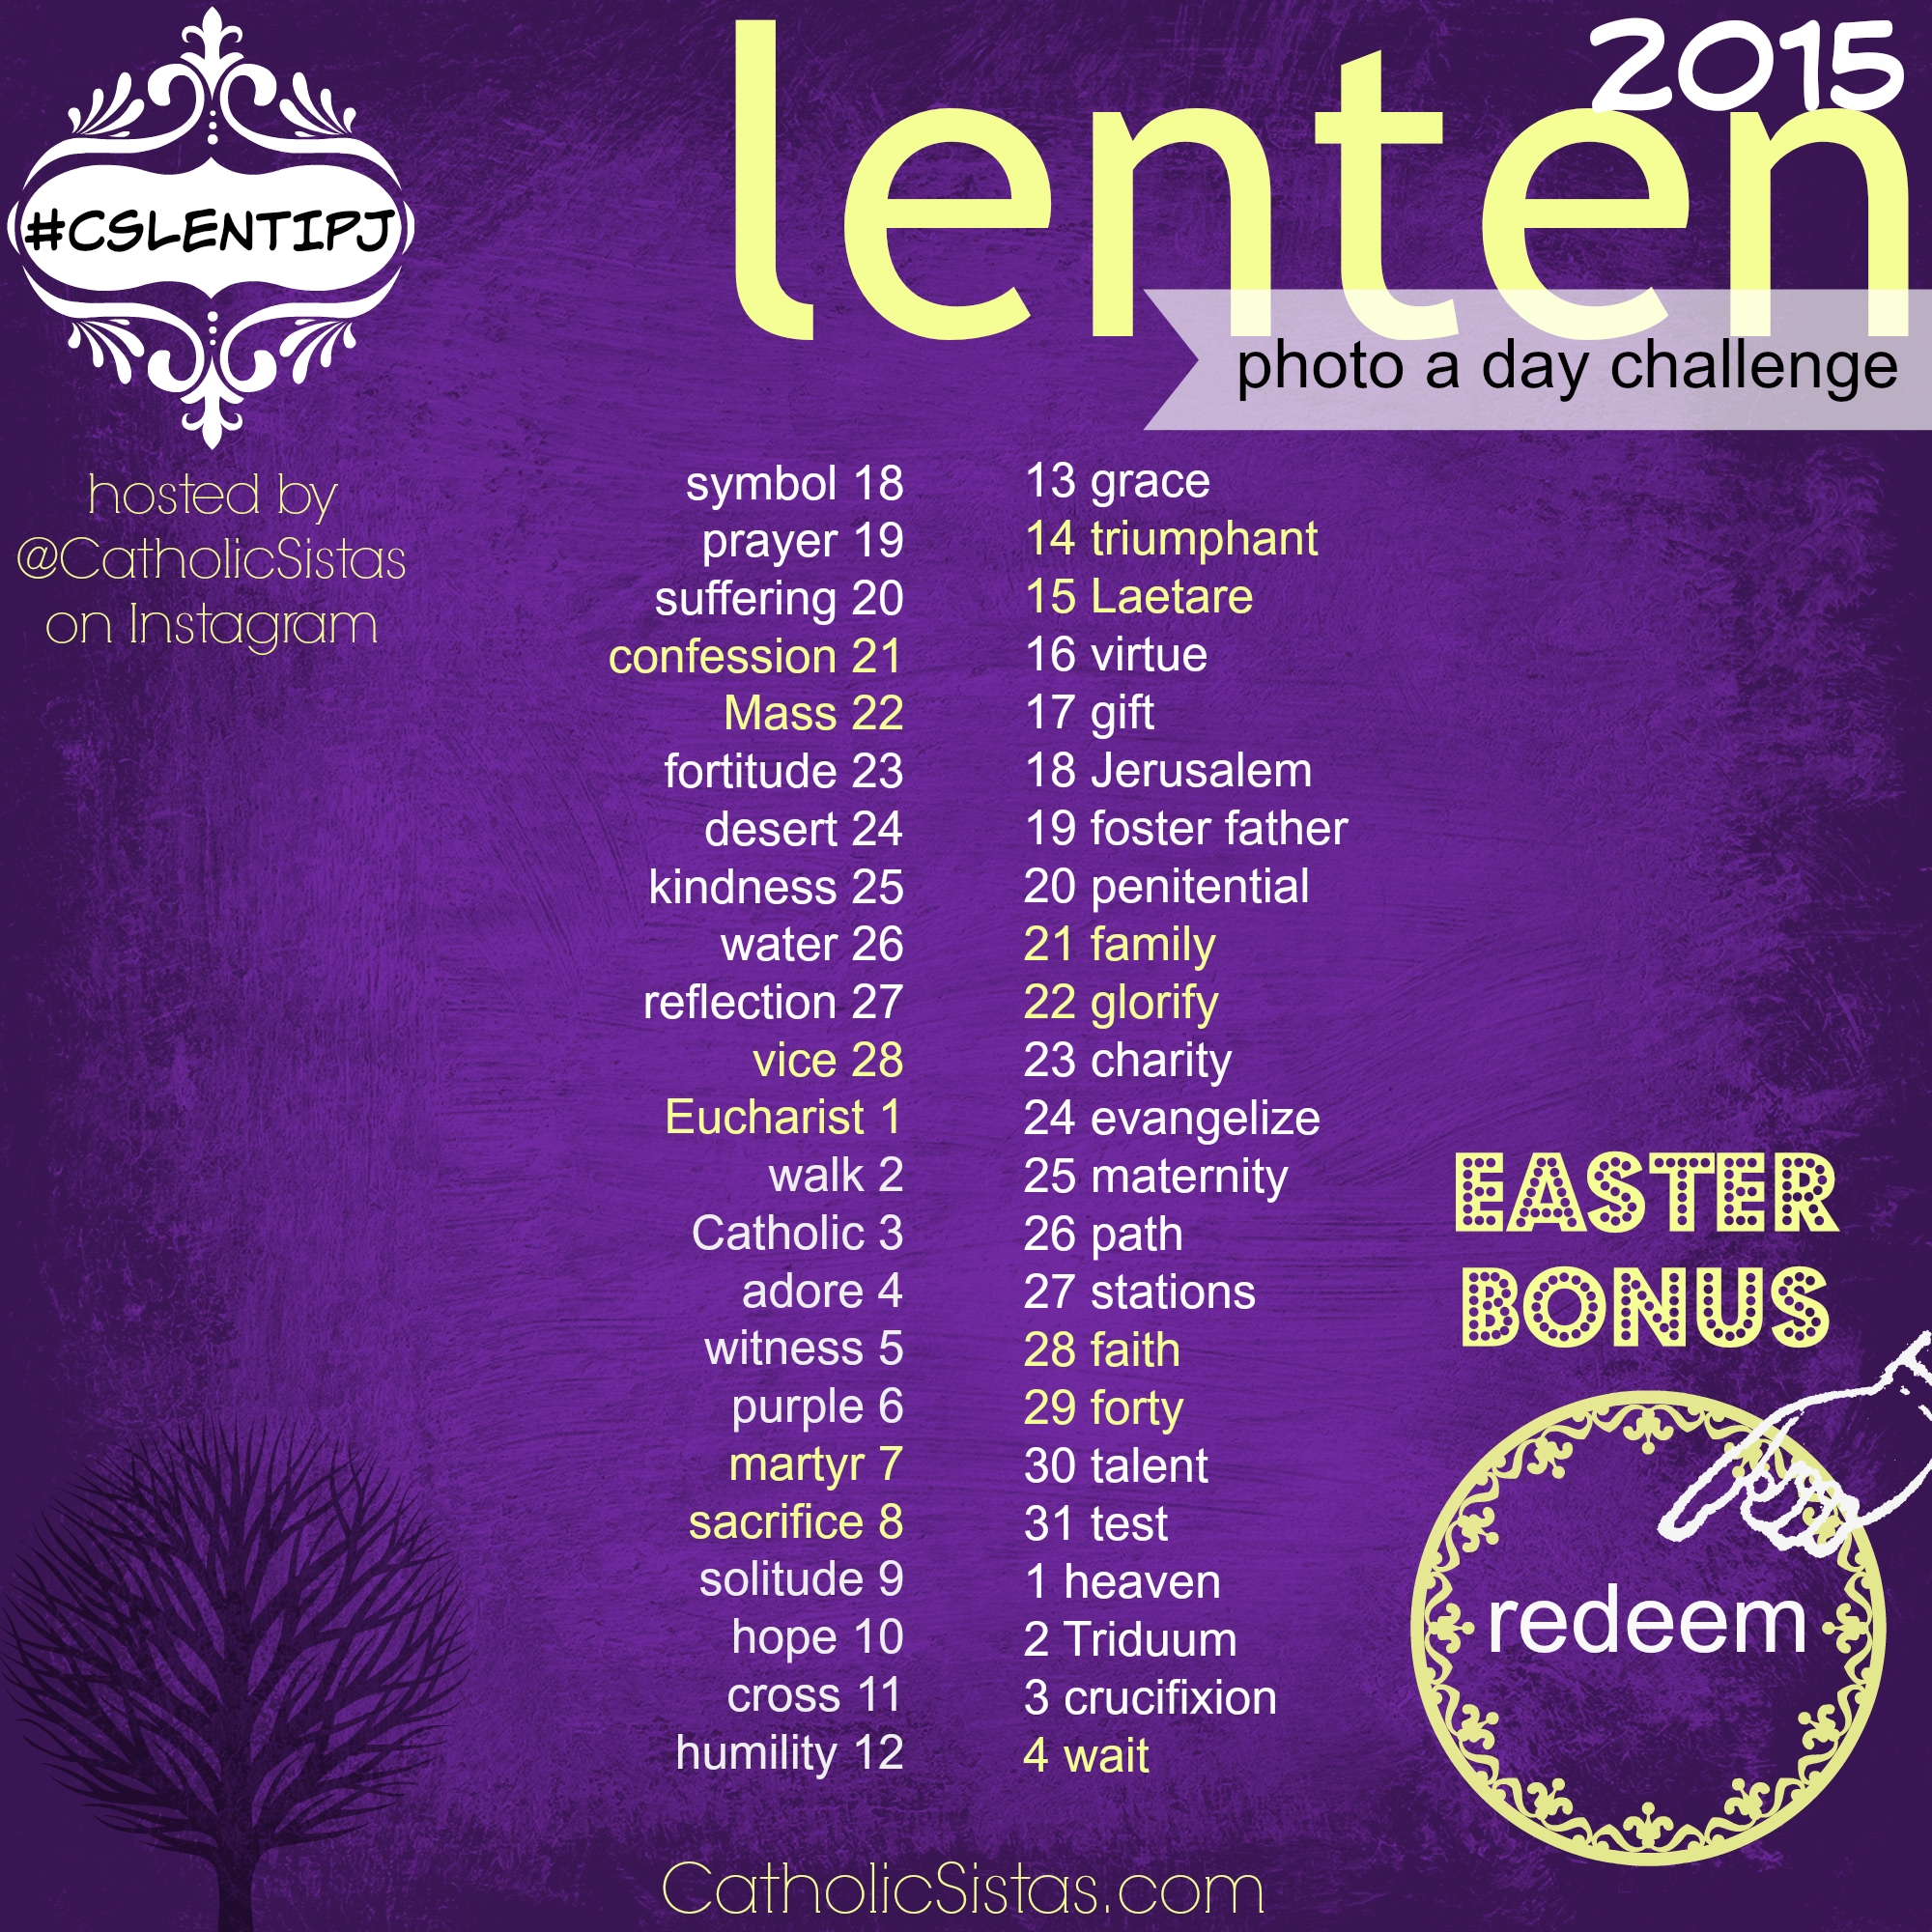 10 Awesome Ideas On What To Give Up For Lent 2015 lenten instagram photo a day journey catholic sistas 3 2022